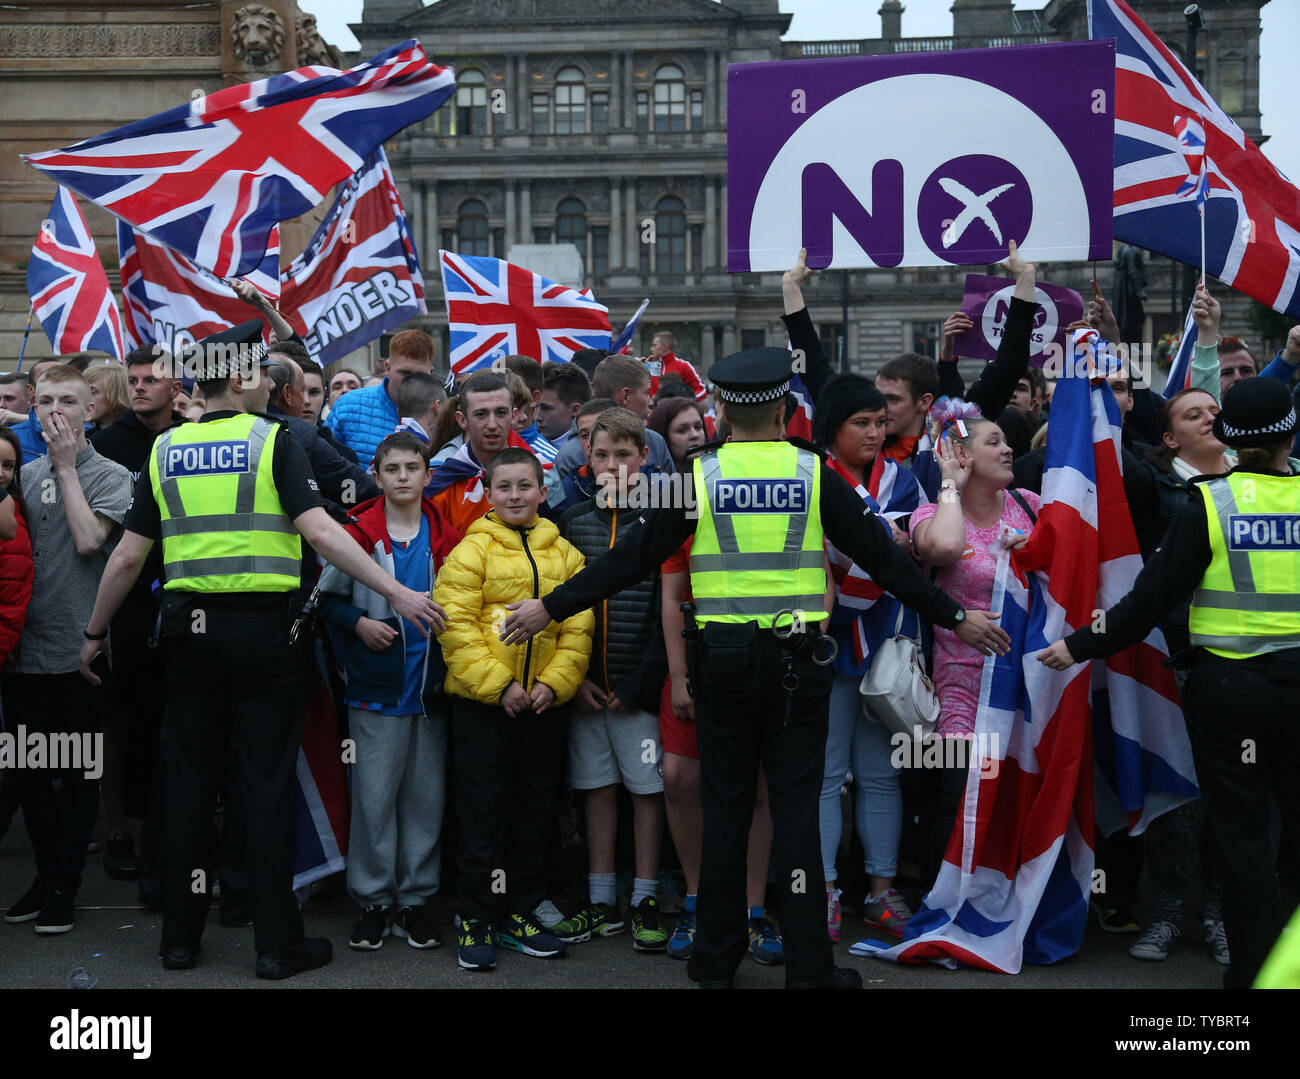 Pro-Unionist voters taunt Yes vote campaigners in George Sq in Glasgow,Scotland on September 19, 2014. Pro Union voters won the referendum by Fifty-Five percent to Forty-Five percent. The First Minister of Scotland Alex Salmond has resigned today following the referendum vote.      UPI / Hugo Philpott Stock Photo